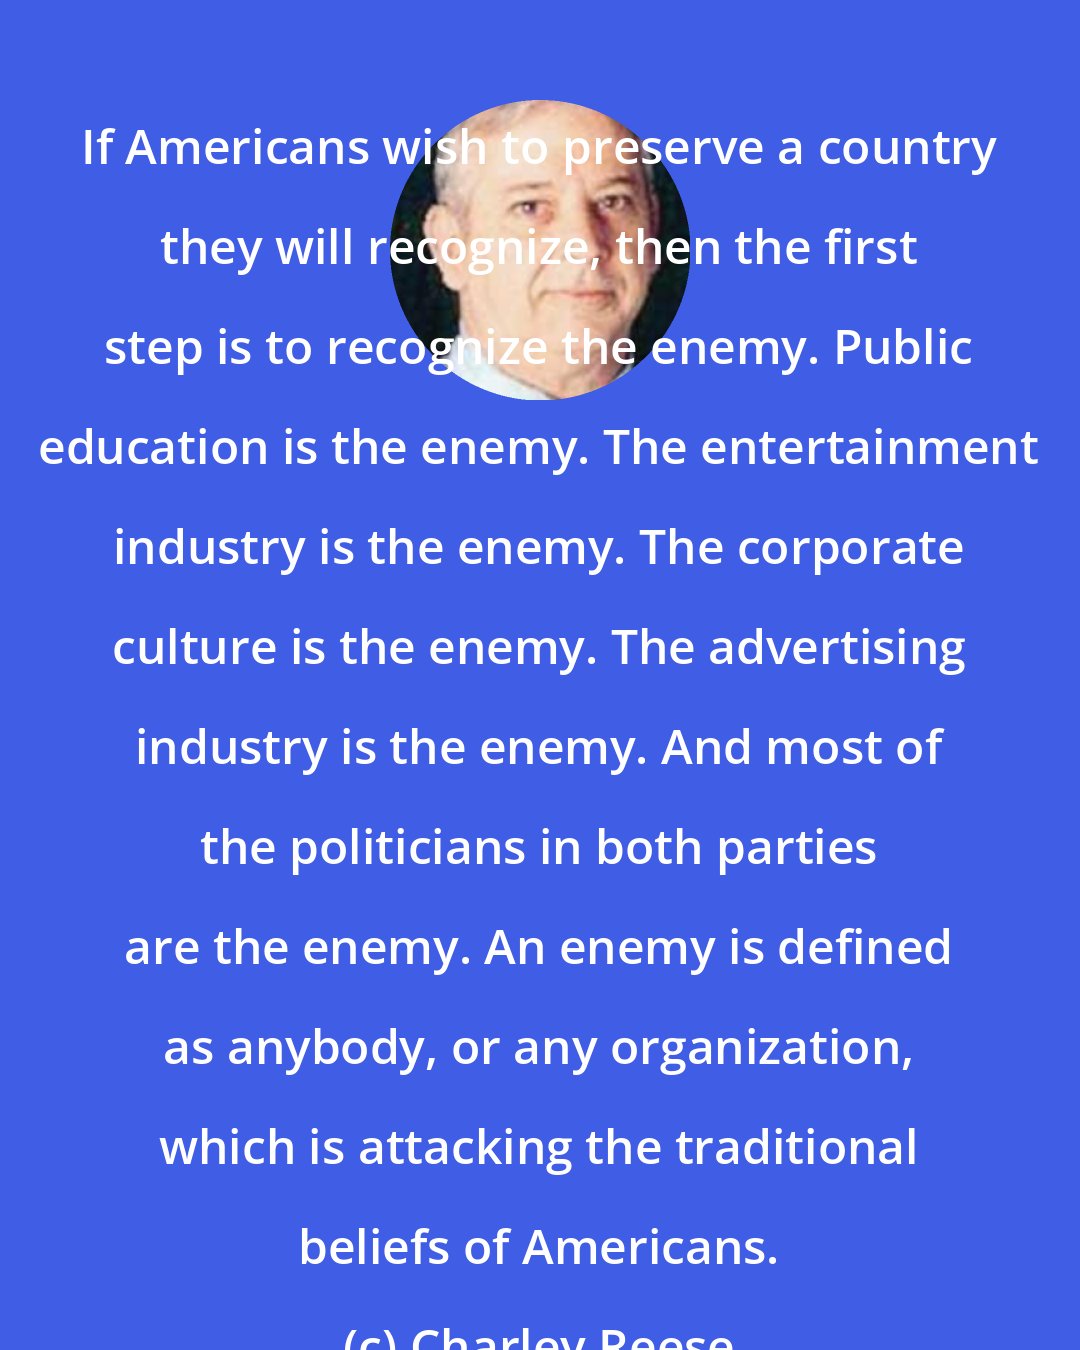 Charley Reese: If Americans wish to preserve a country they will recognize, then the first step is to recognize the enemy. Public education is the enemy. The entertainment industry is the enemy. The corporate culture is the enemy. The advertising industry is the enemy. And most of the politicians in both parties are the enemy. An enemy is defined as anybody, or any organization, which is attacking the traditional beliefs of Americans.